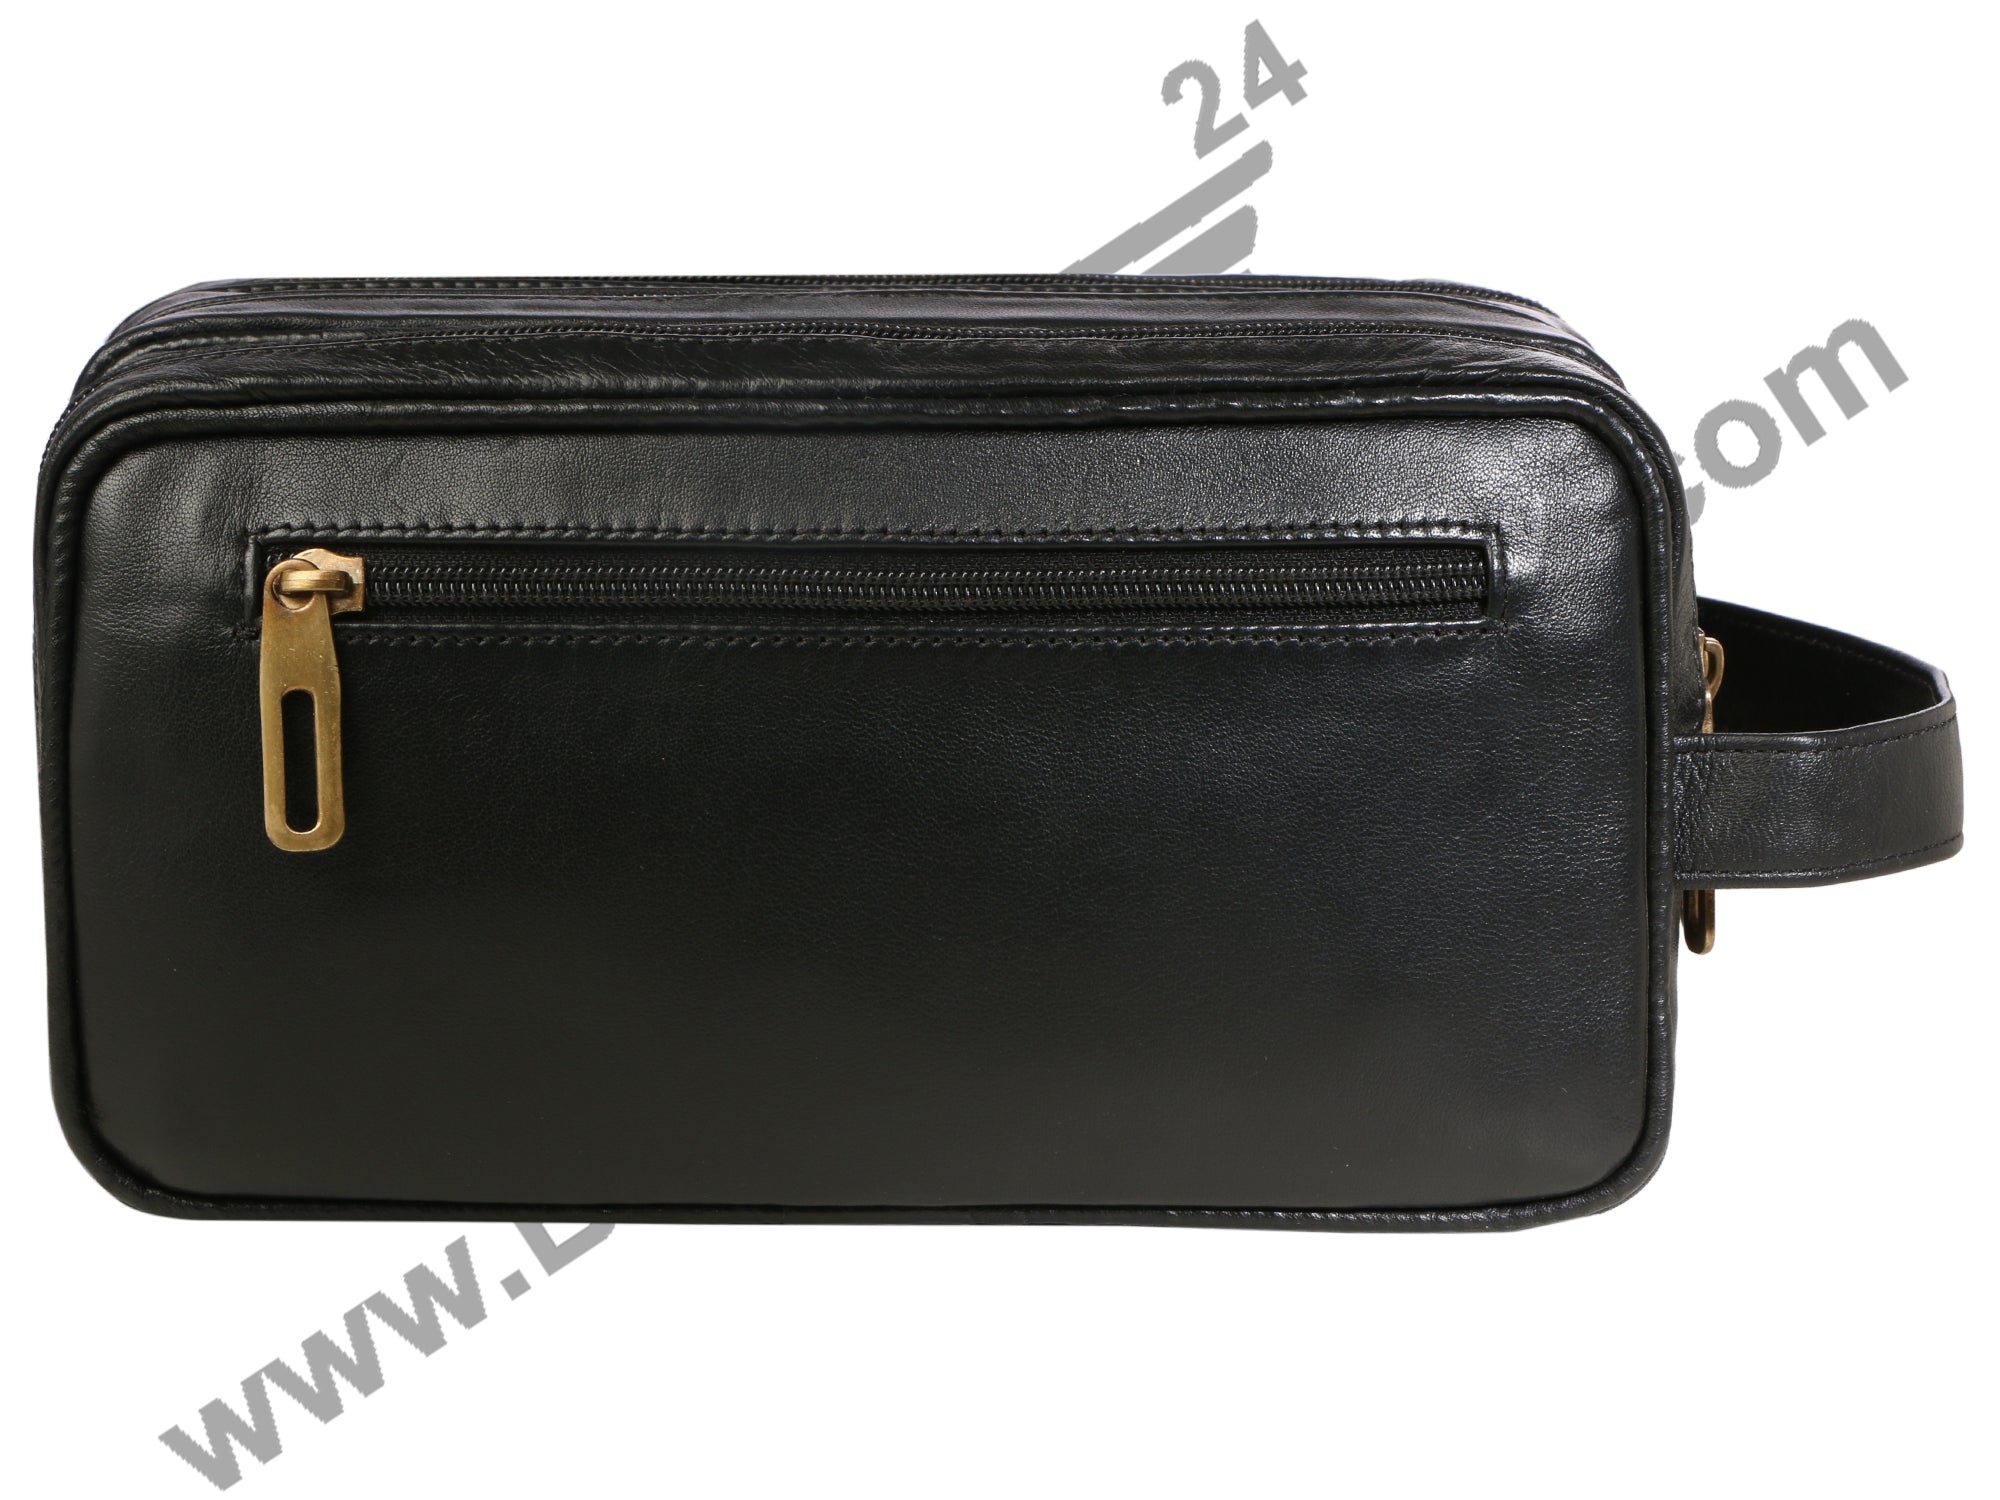 Side view of 3 Zip Dopp Kit.  Three compartments are zipped. One side zip is also visible. Dopp kit is black in color.